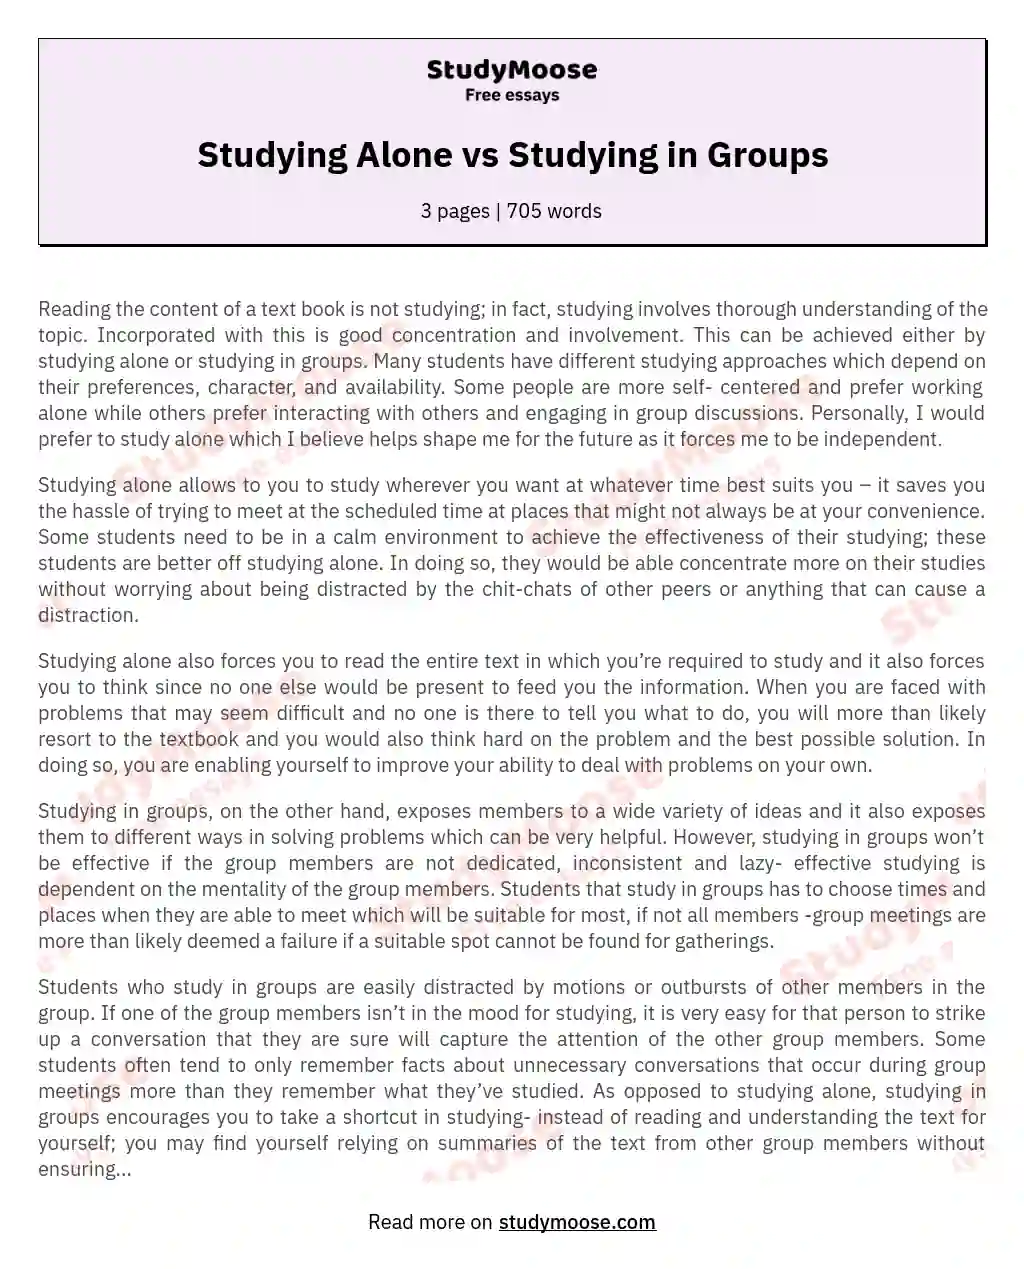 Studying Alone vs Studying in Groups essay